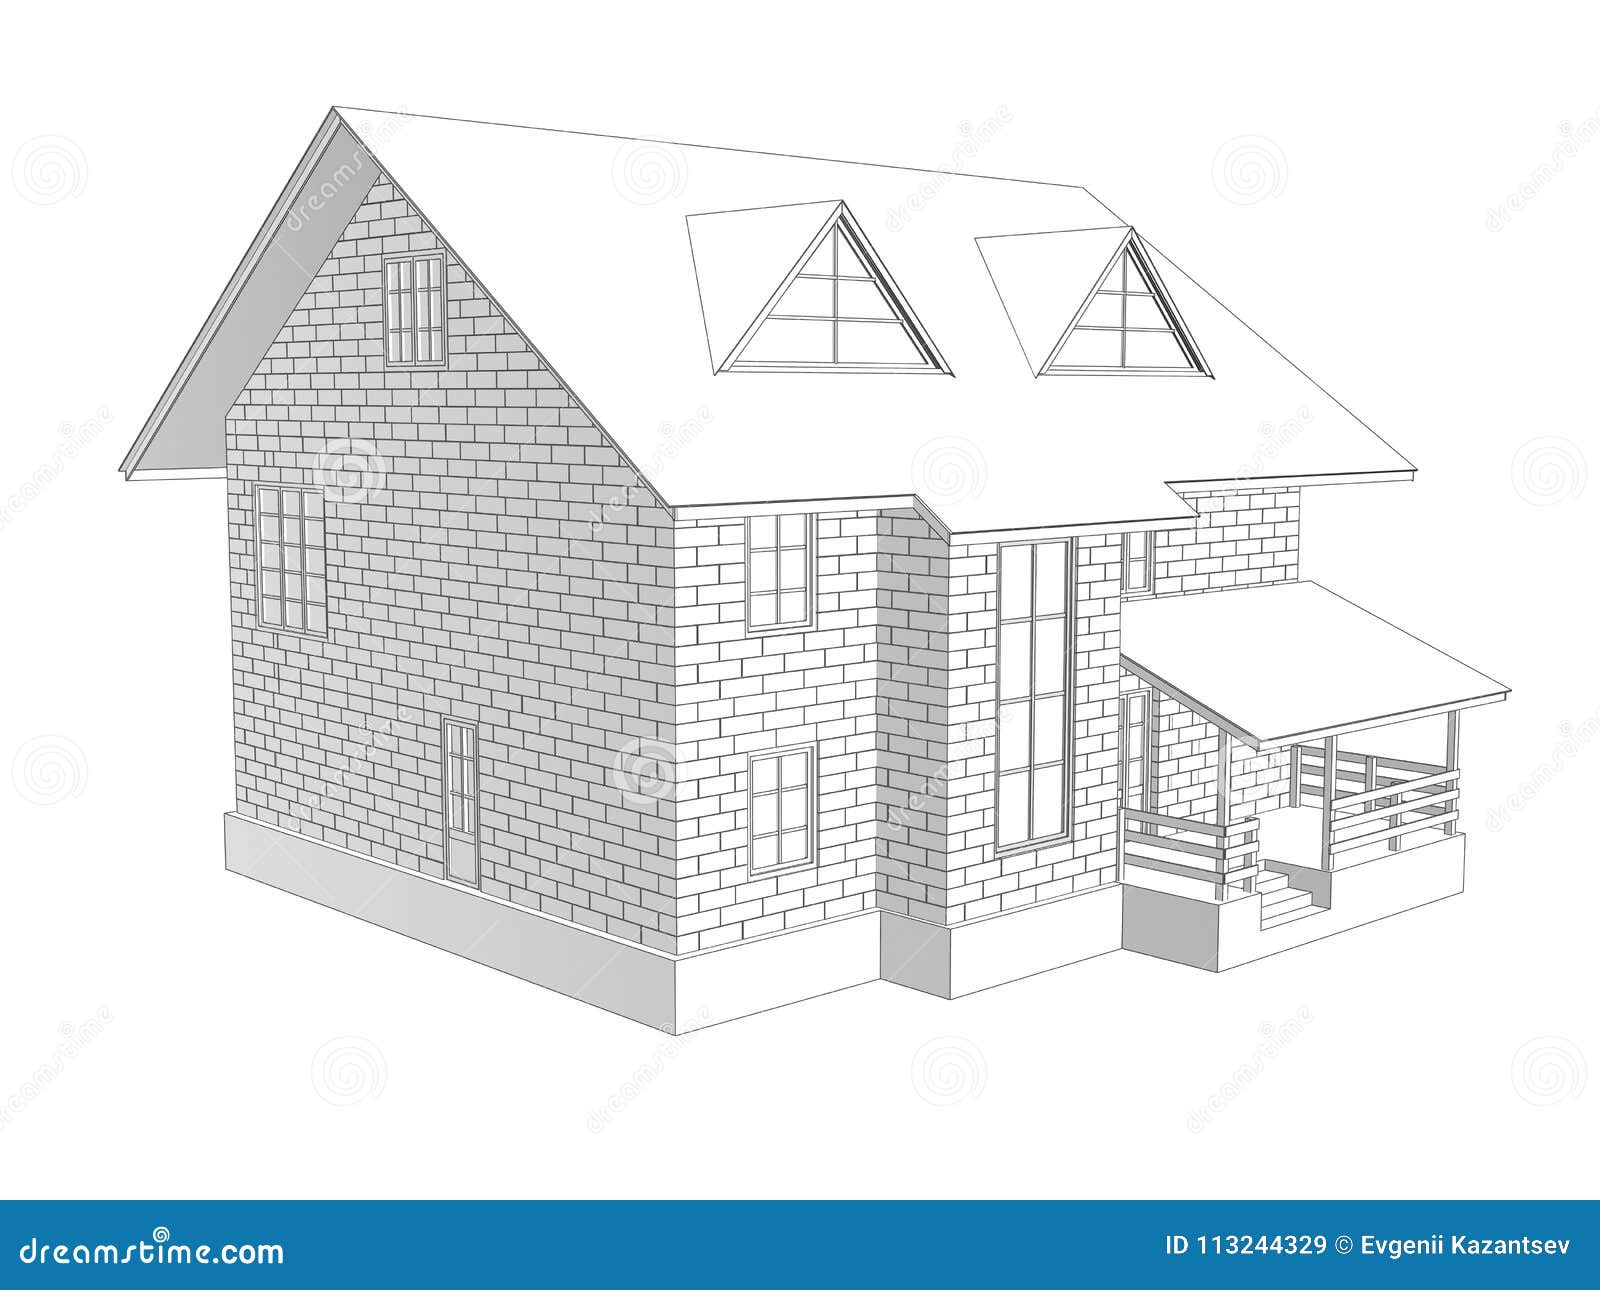 3d Illustration of a Two-storey Cottage House. Linear and Tonal Drawing  Stock Illustration - Illustration of linear, drawing: 113244329